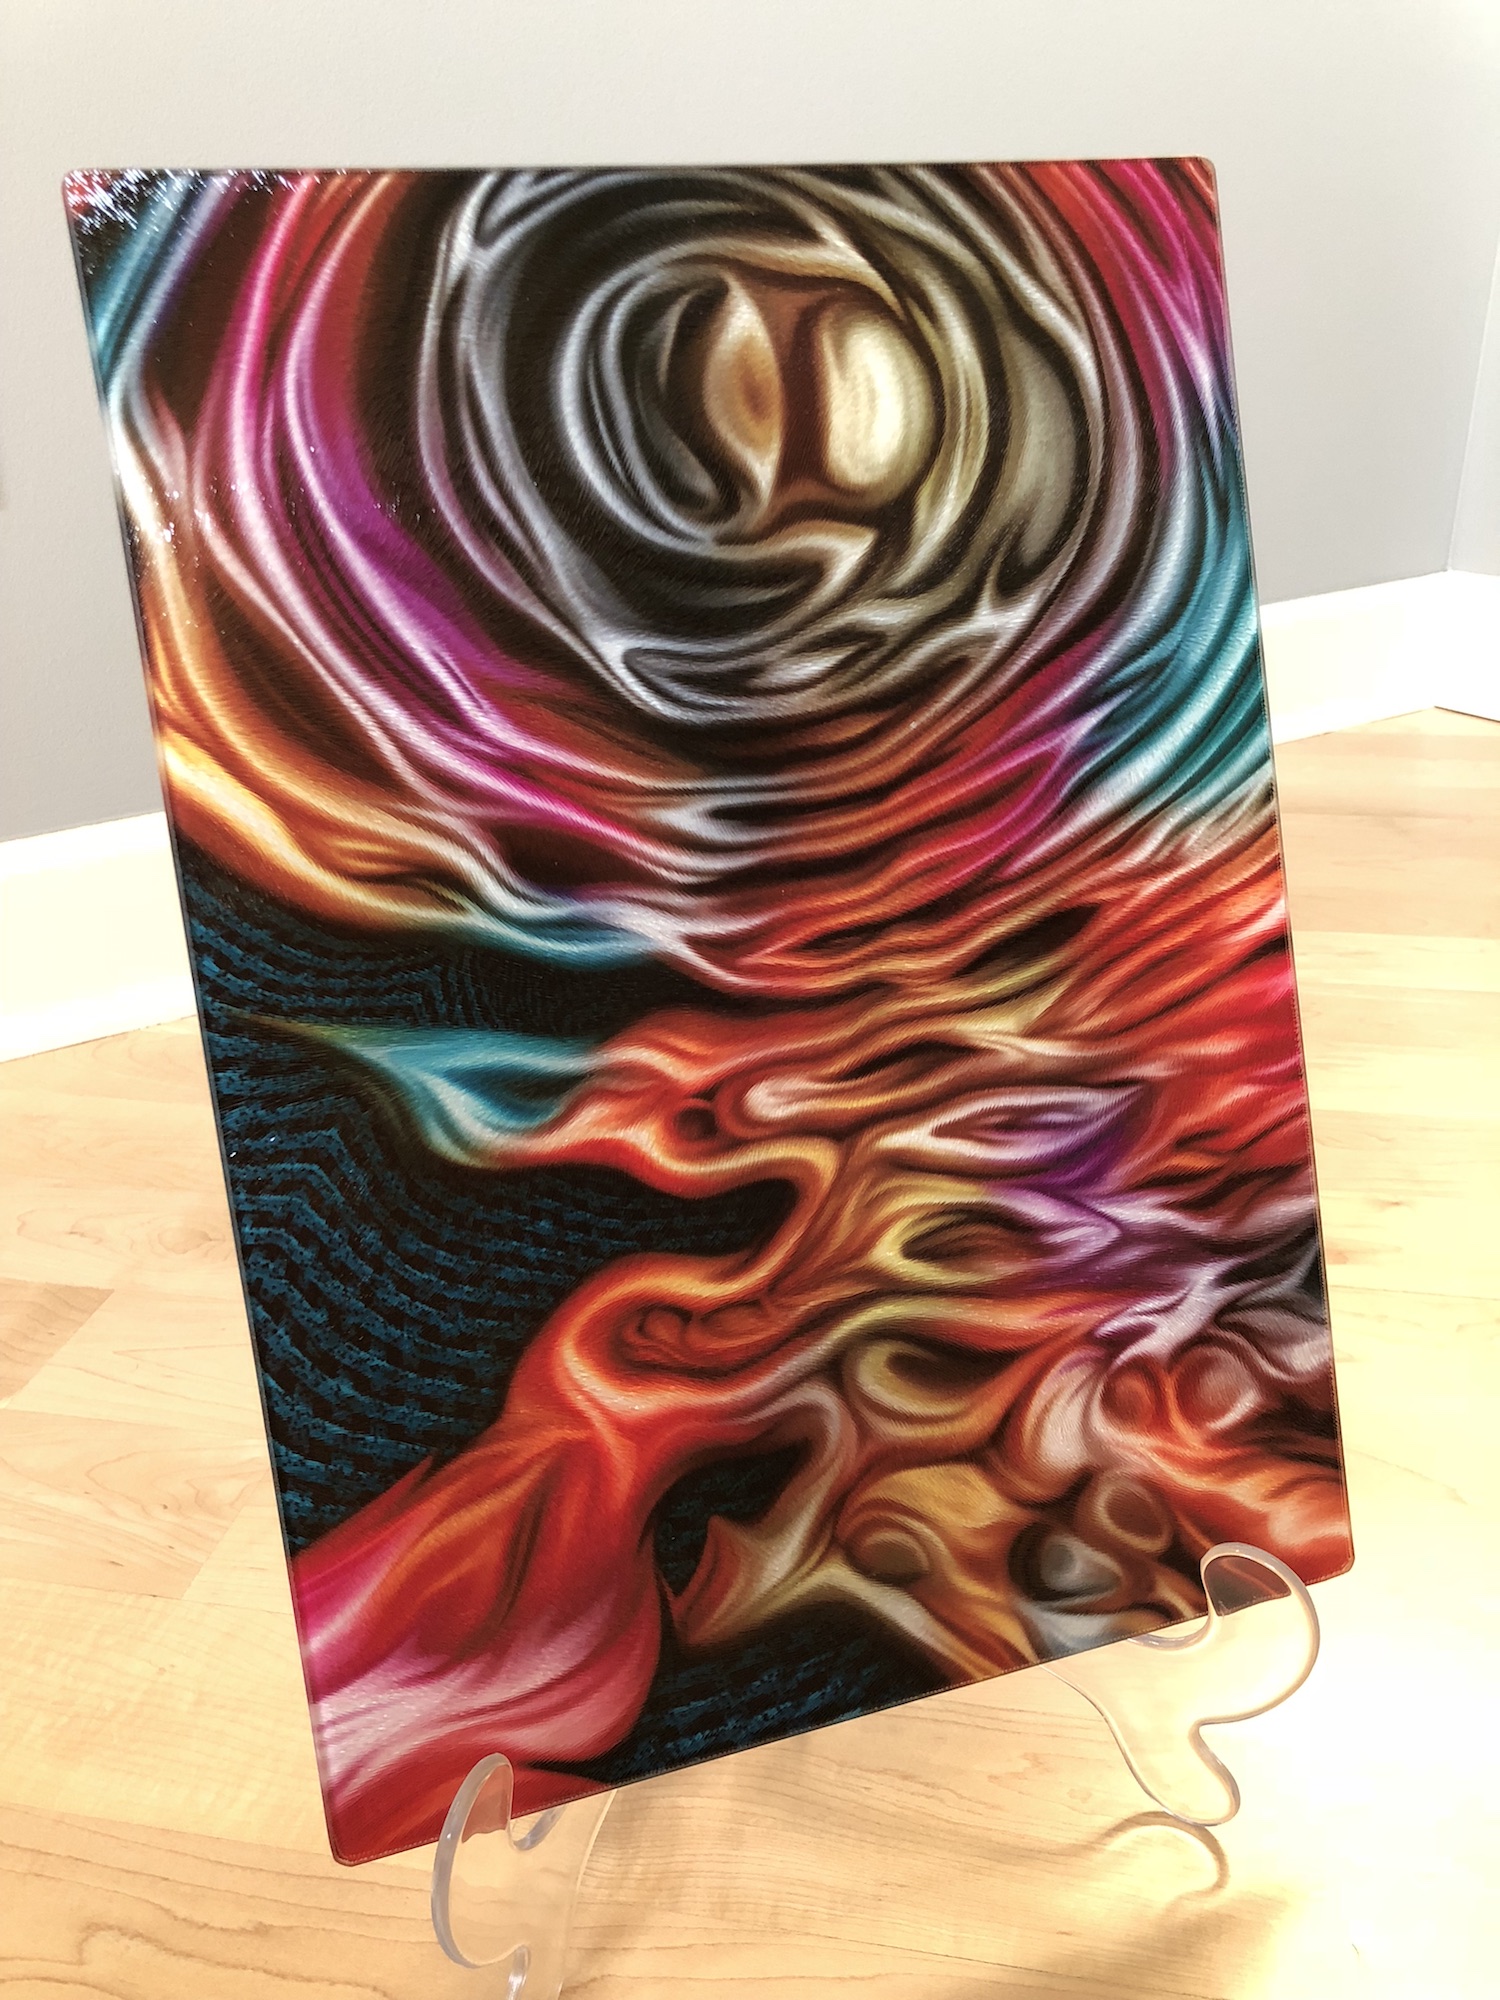 Cutting Boards made with sublimation printing